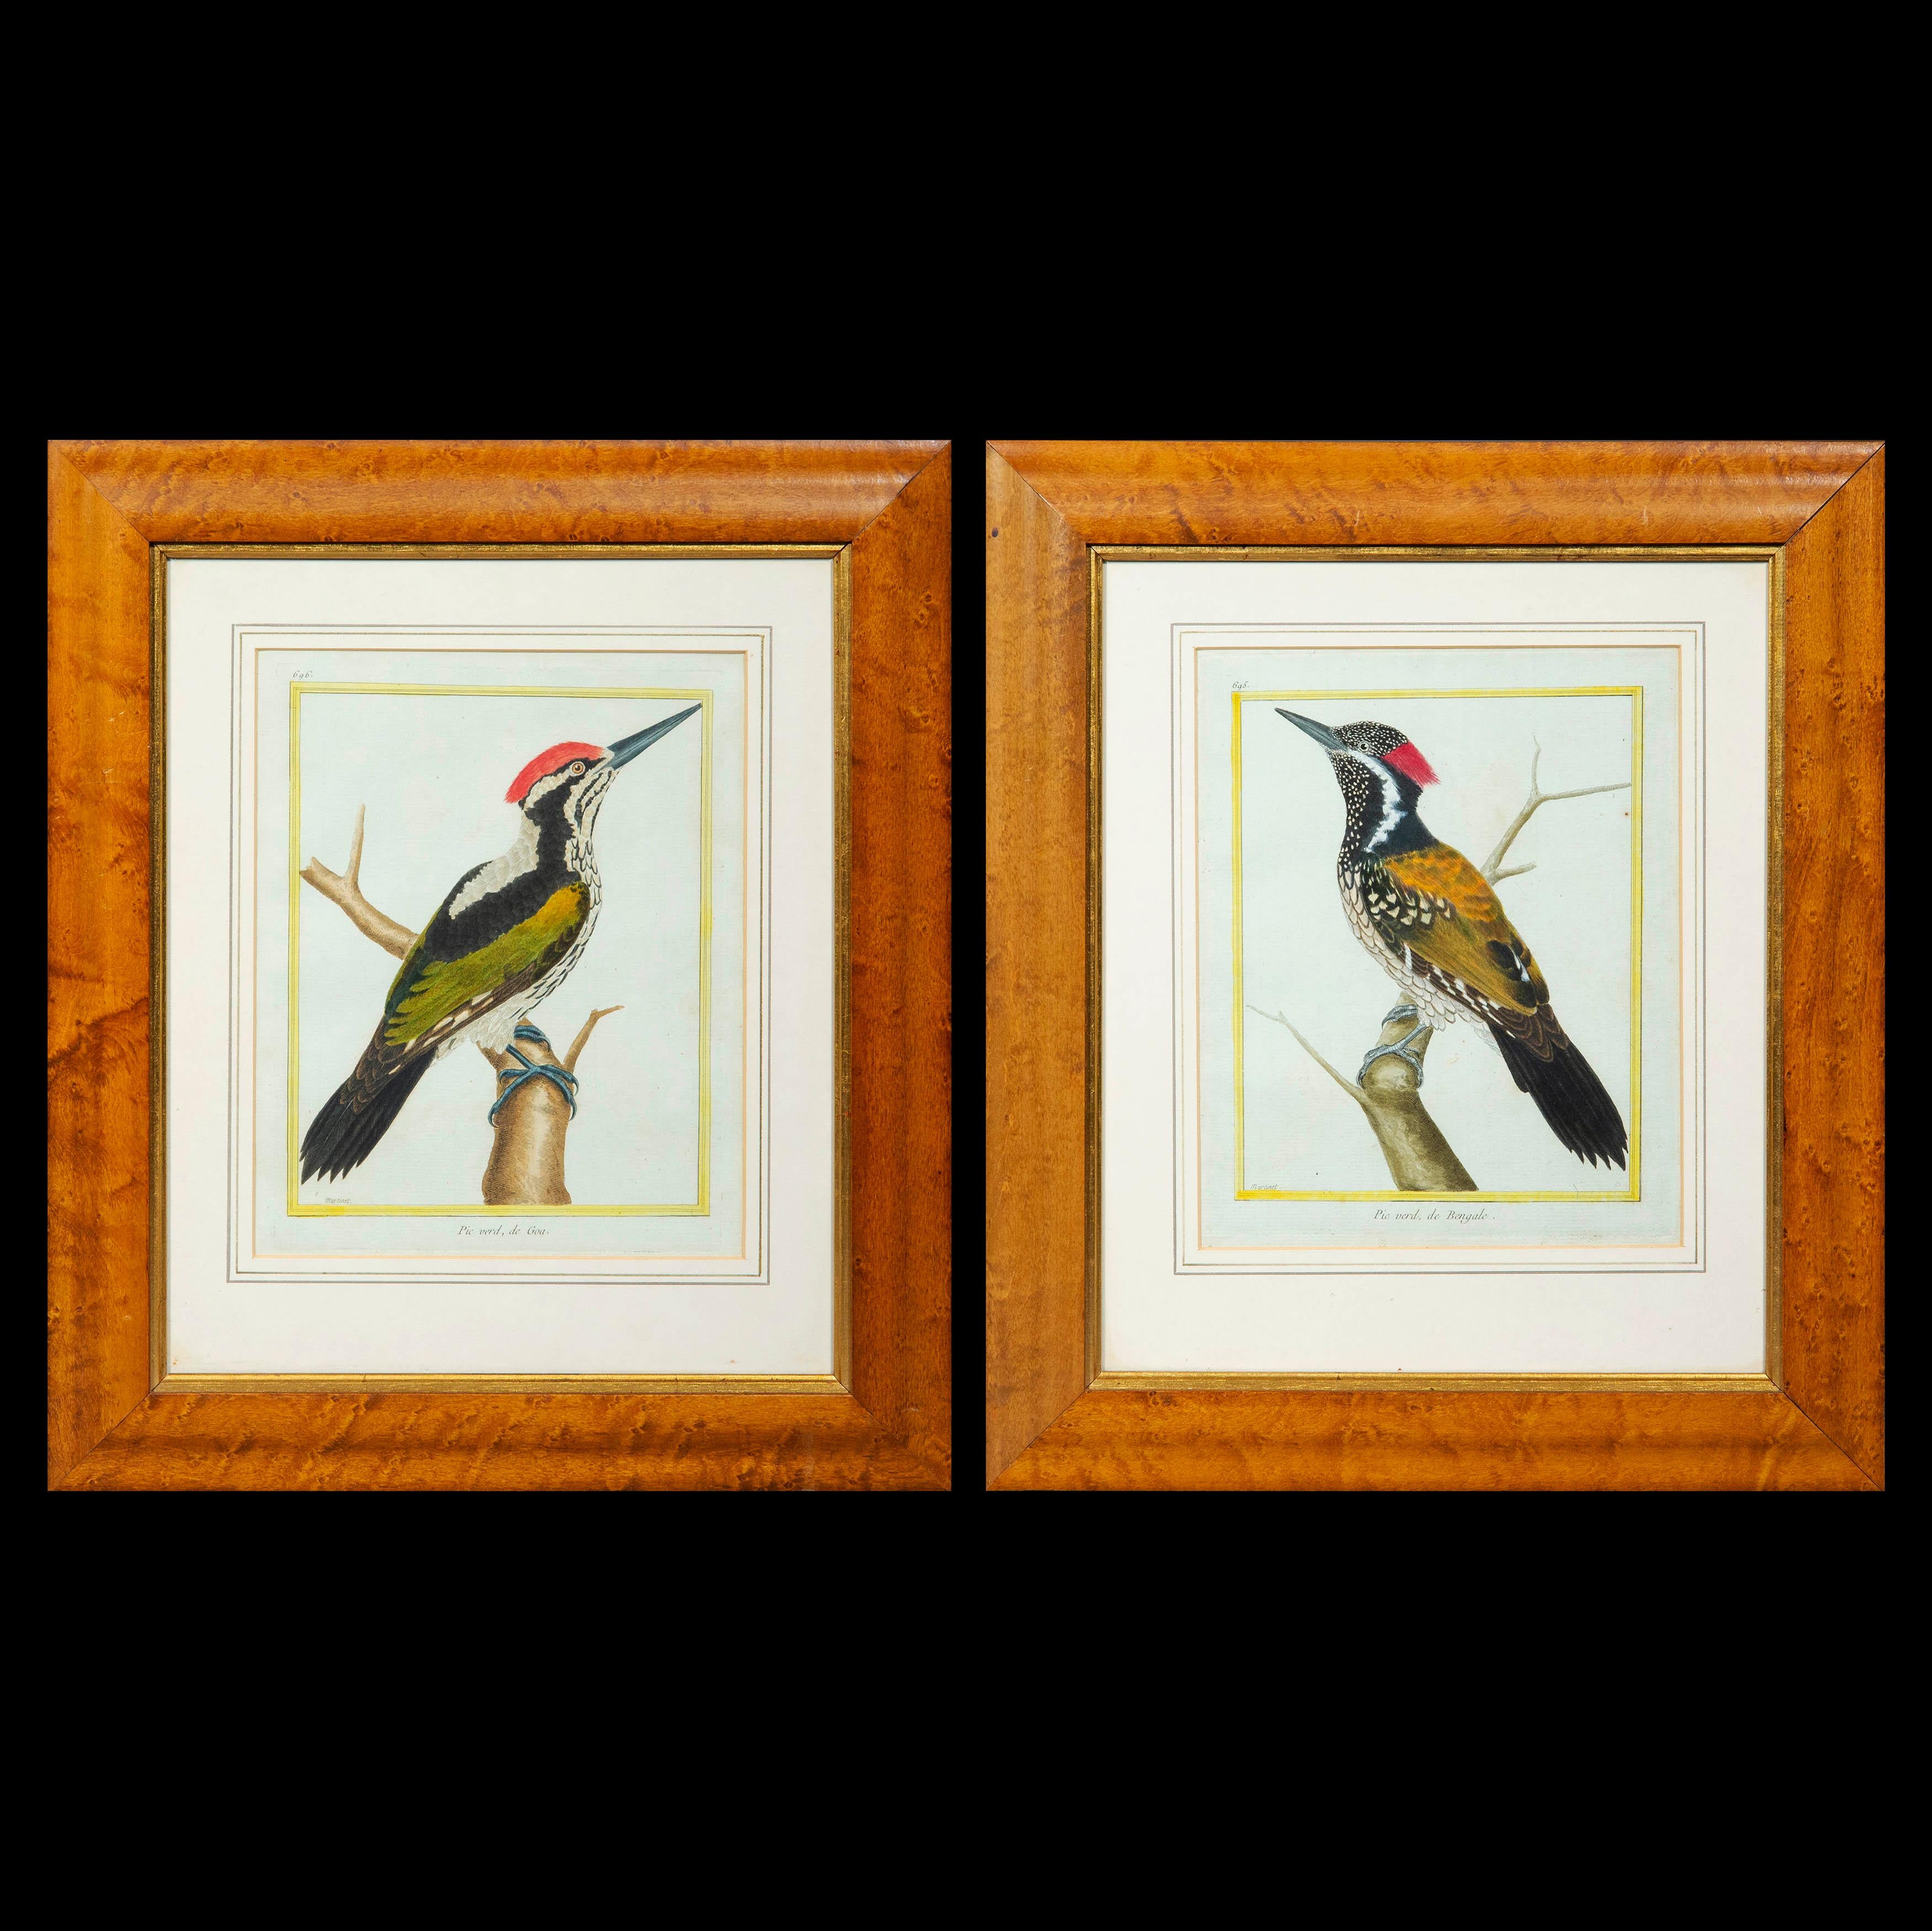 A very decorative pair of ornithological engravings, by François Nicolas Martinet, from Histoire Naturelle des Oiseaux, 1770–1786.
France, circa 1770–80.

Original hand-colored copper-plate engravings, signed in the bottom of the yellow border,